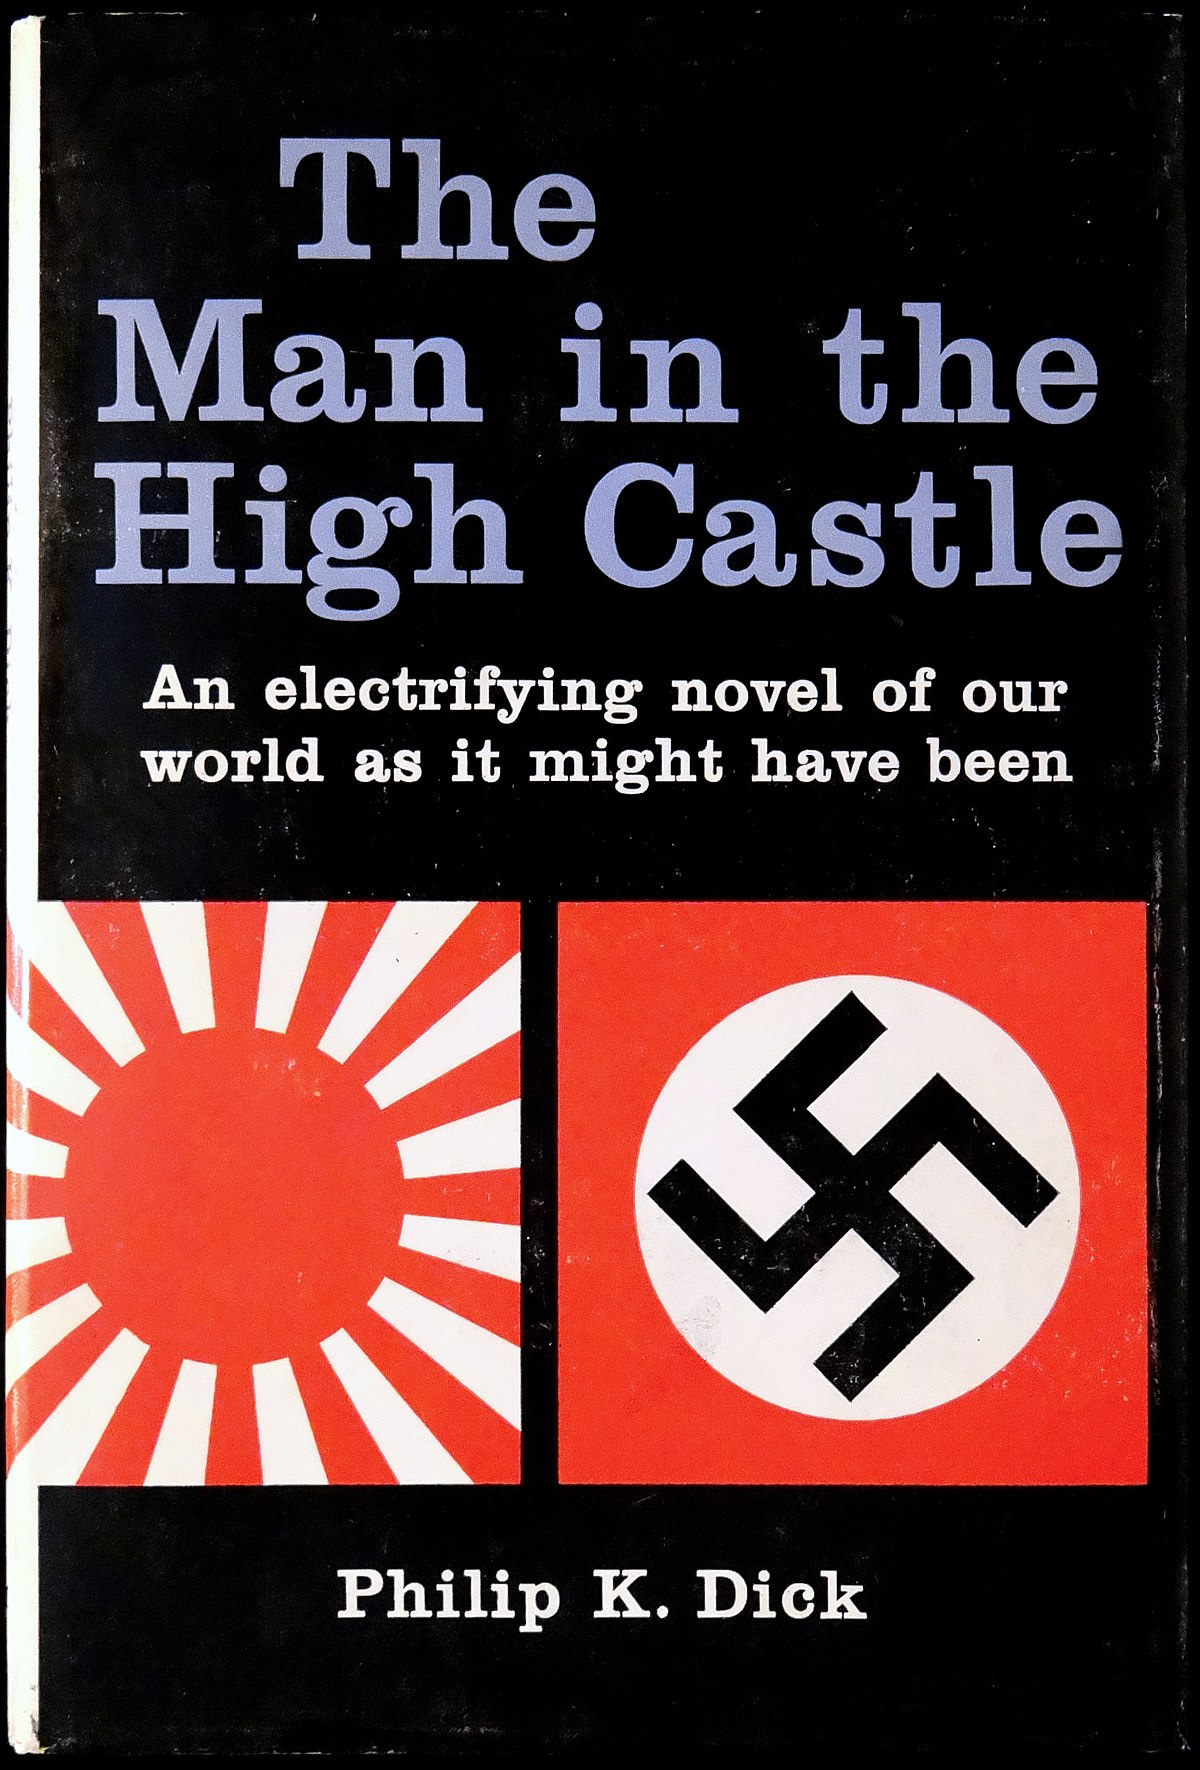 The Man in the High Castle - Wikipedia